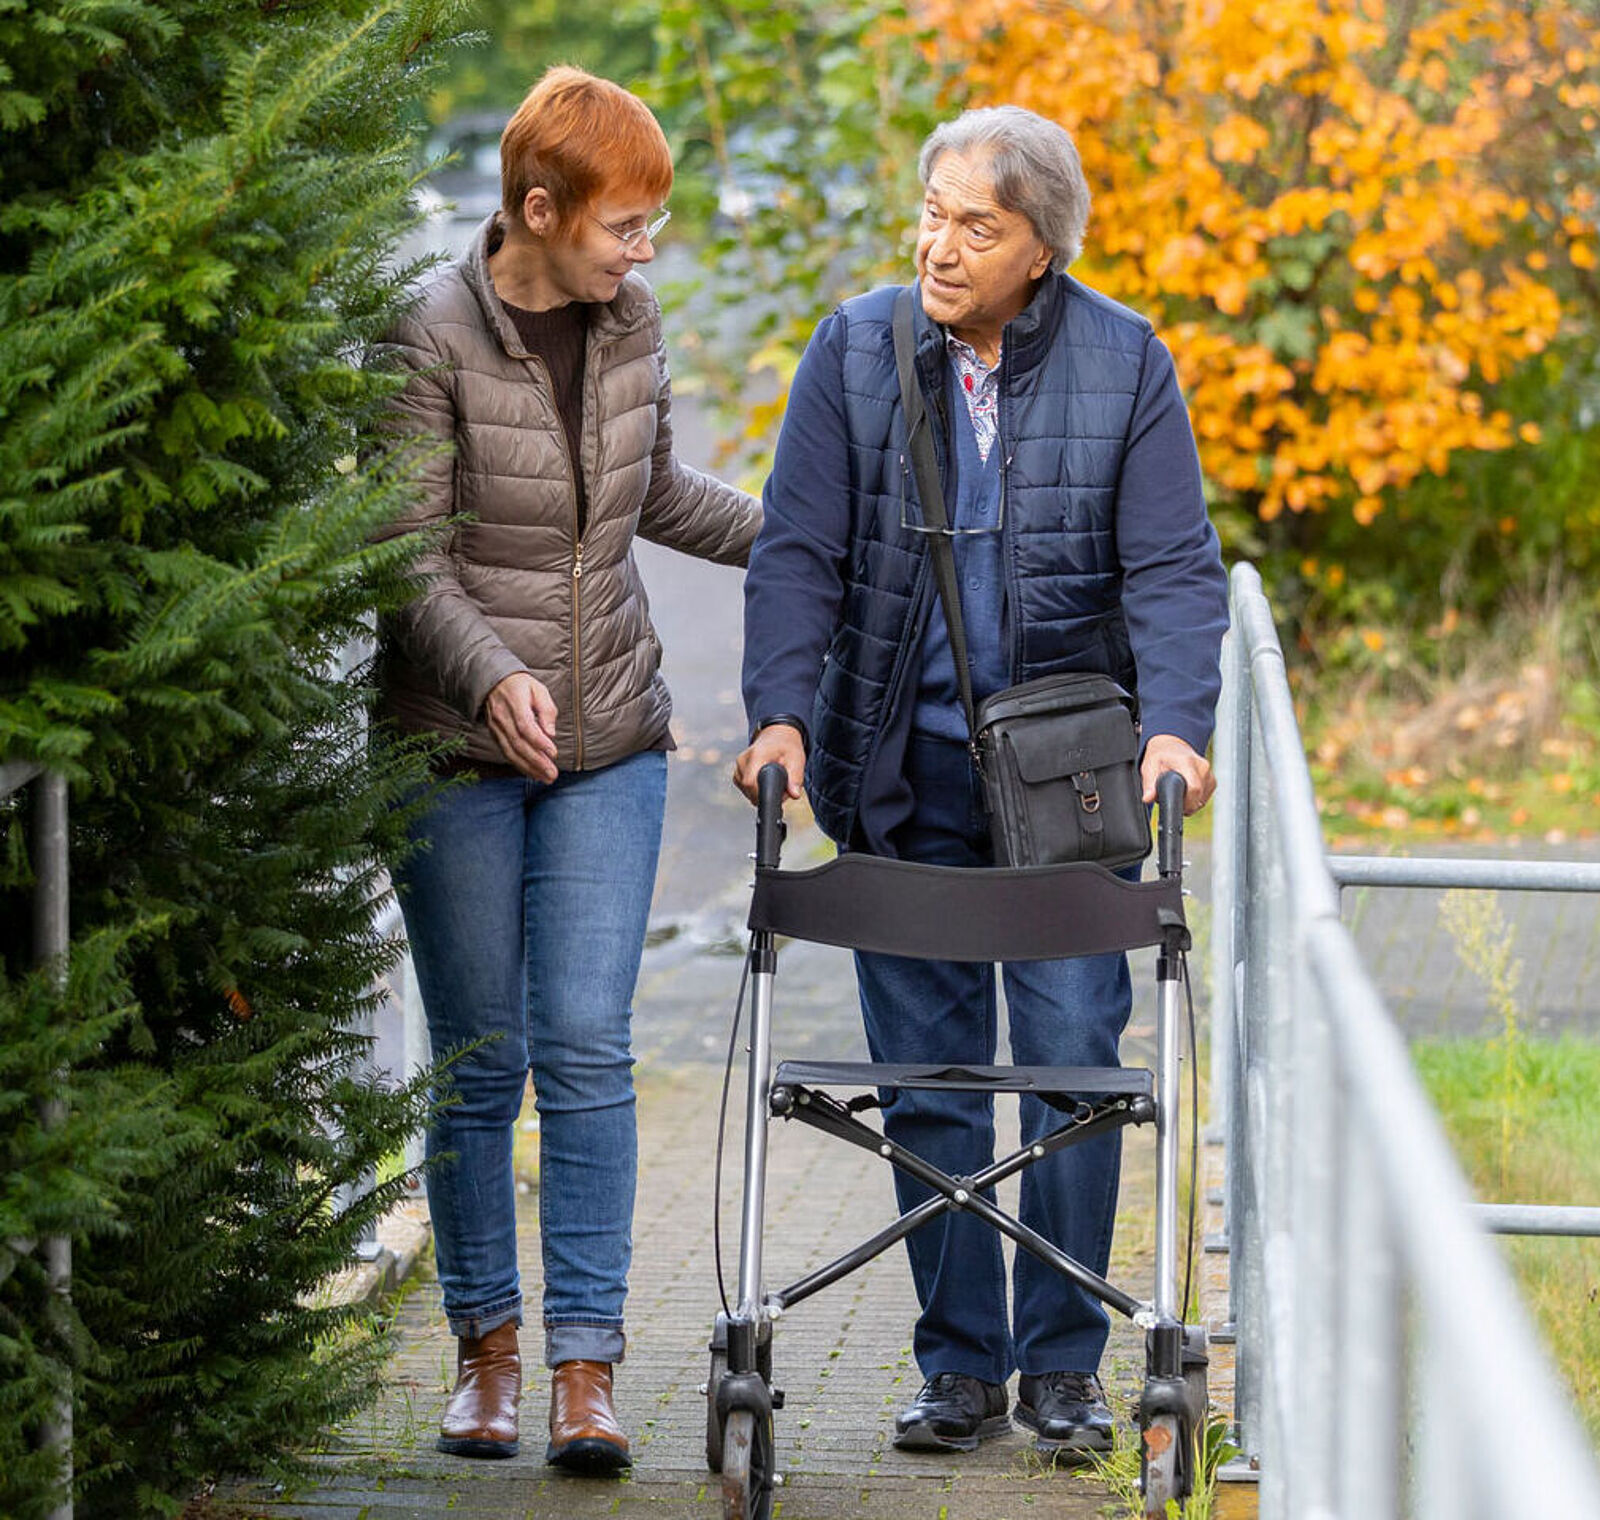 Picture shows a care worker with an elderly gentleman on a rollator.